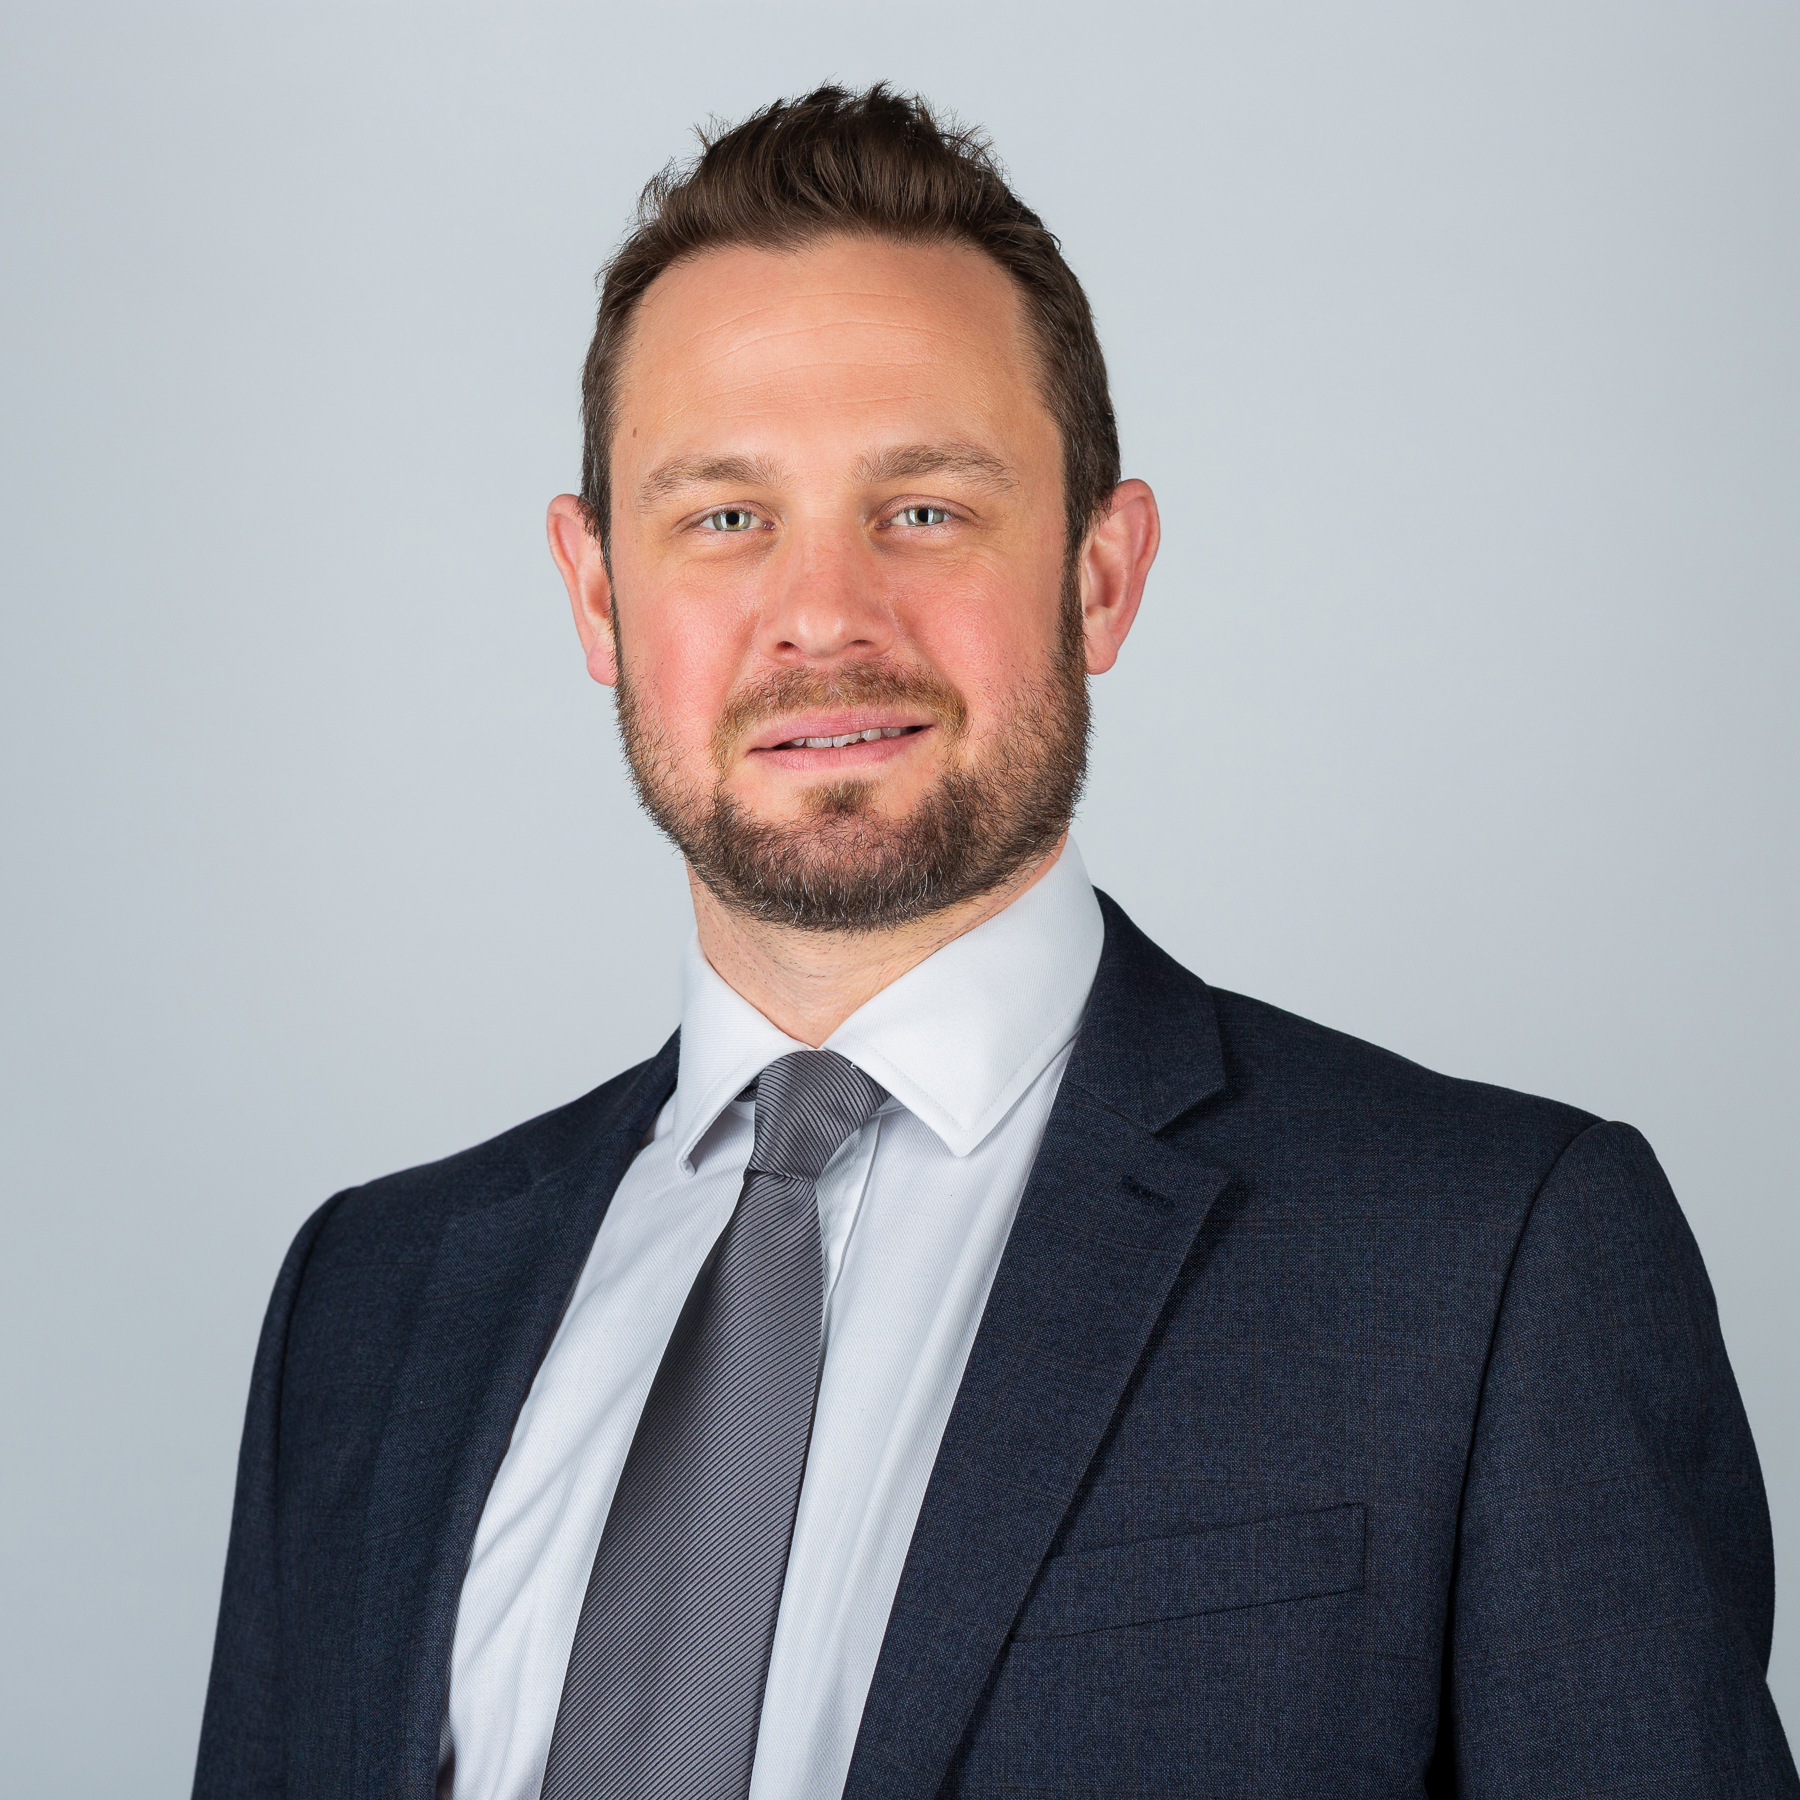 ABP expands property team with the appointment of Tim Hook as Lead Asset Manager at the Port of Southampton